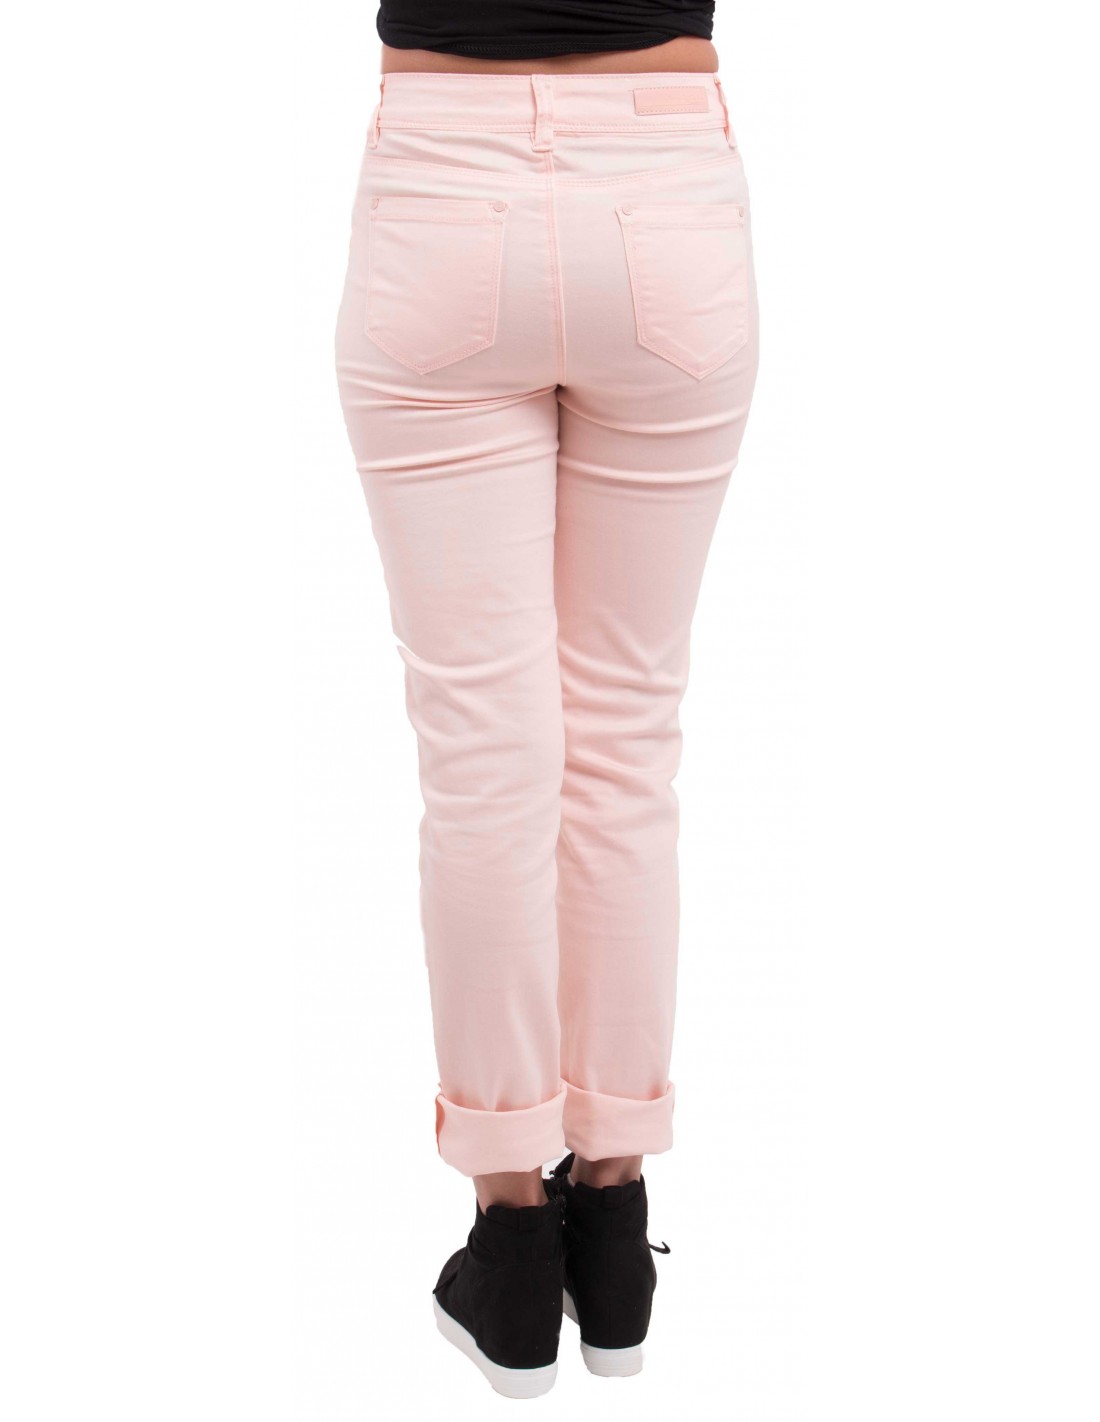 Jean rose clair coupe droite taille haute type jean stretch avec revers